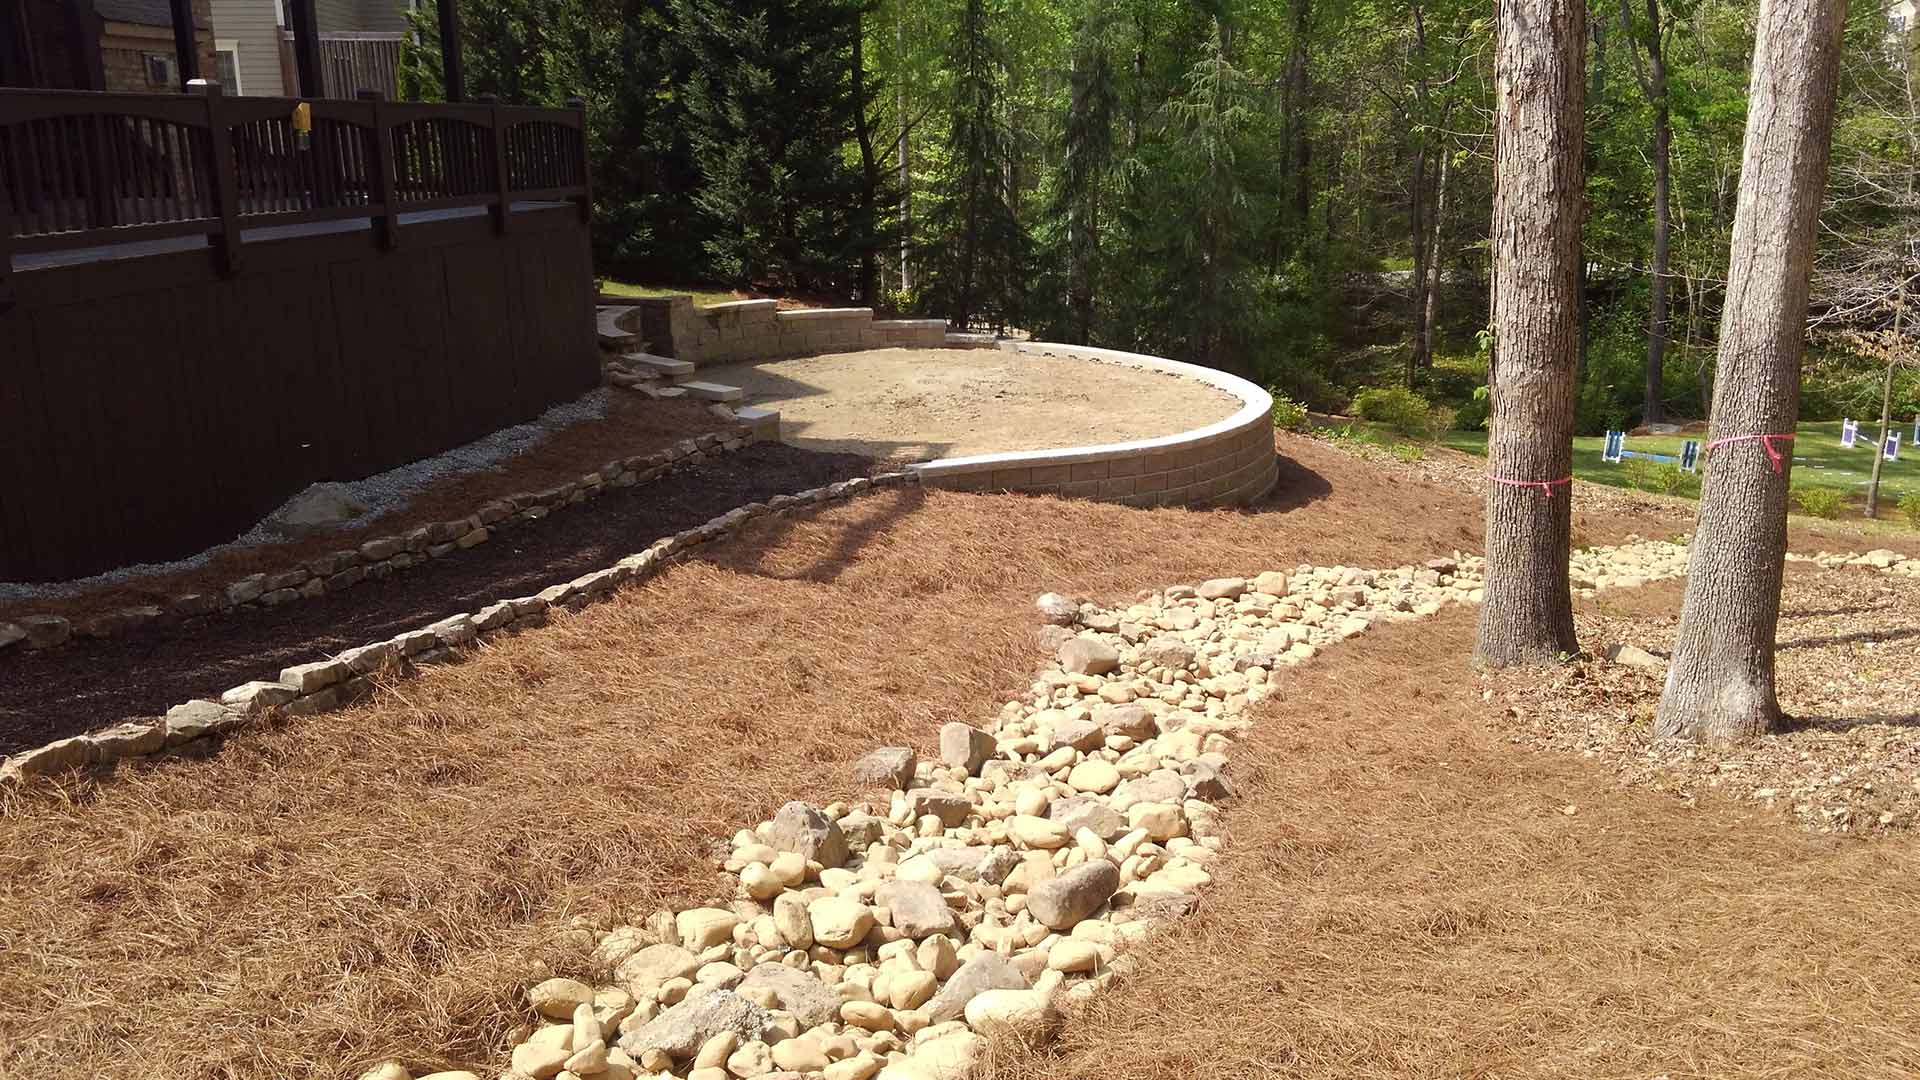 French Drains vs Dry Creek Beds - Which Drainage Solution Is Better?